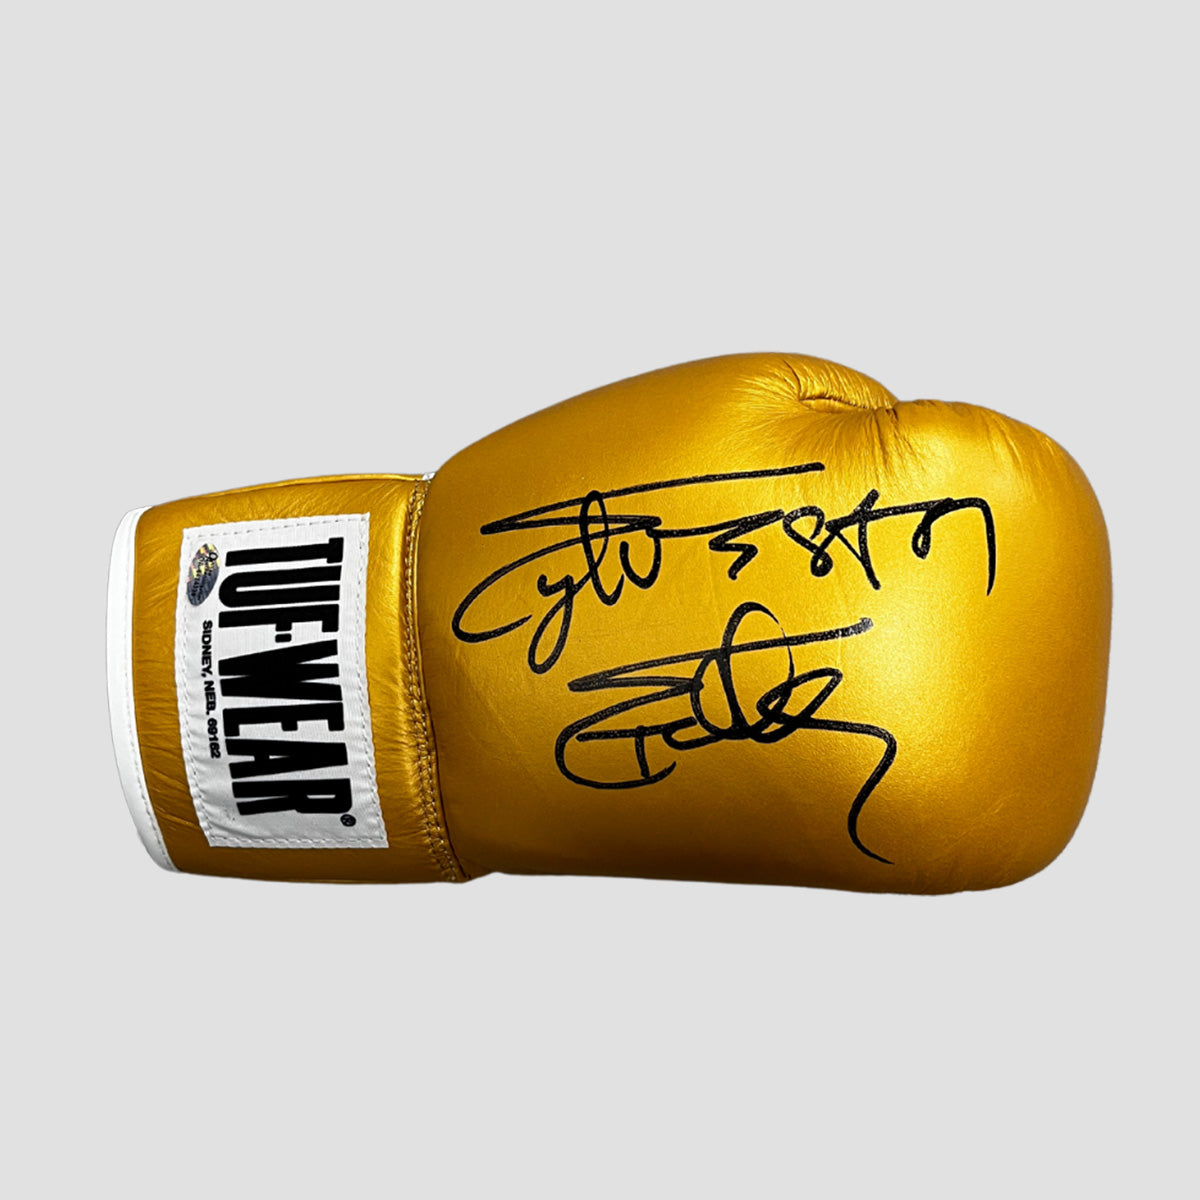 Sylvester Stallone Signed Golden Tufwear Boxing Glove - The Bootroom Collection